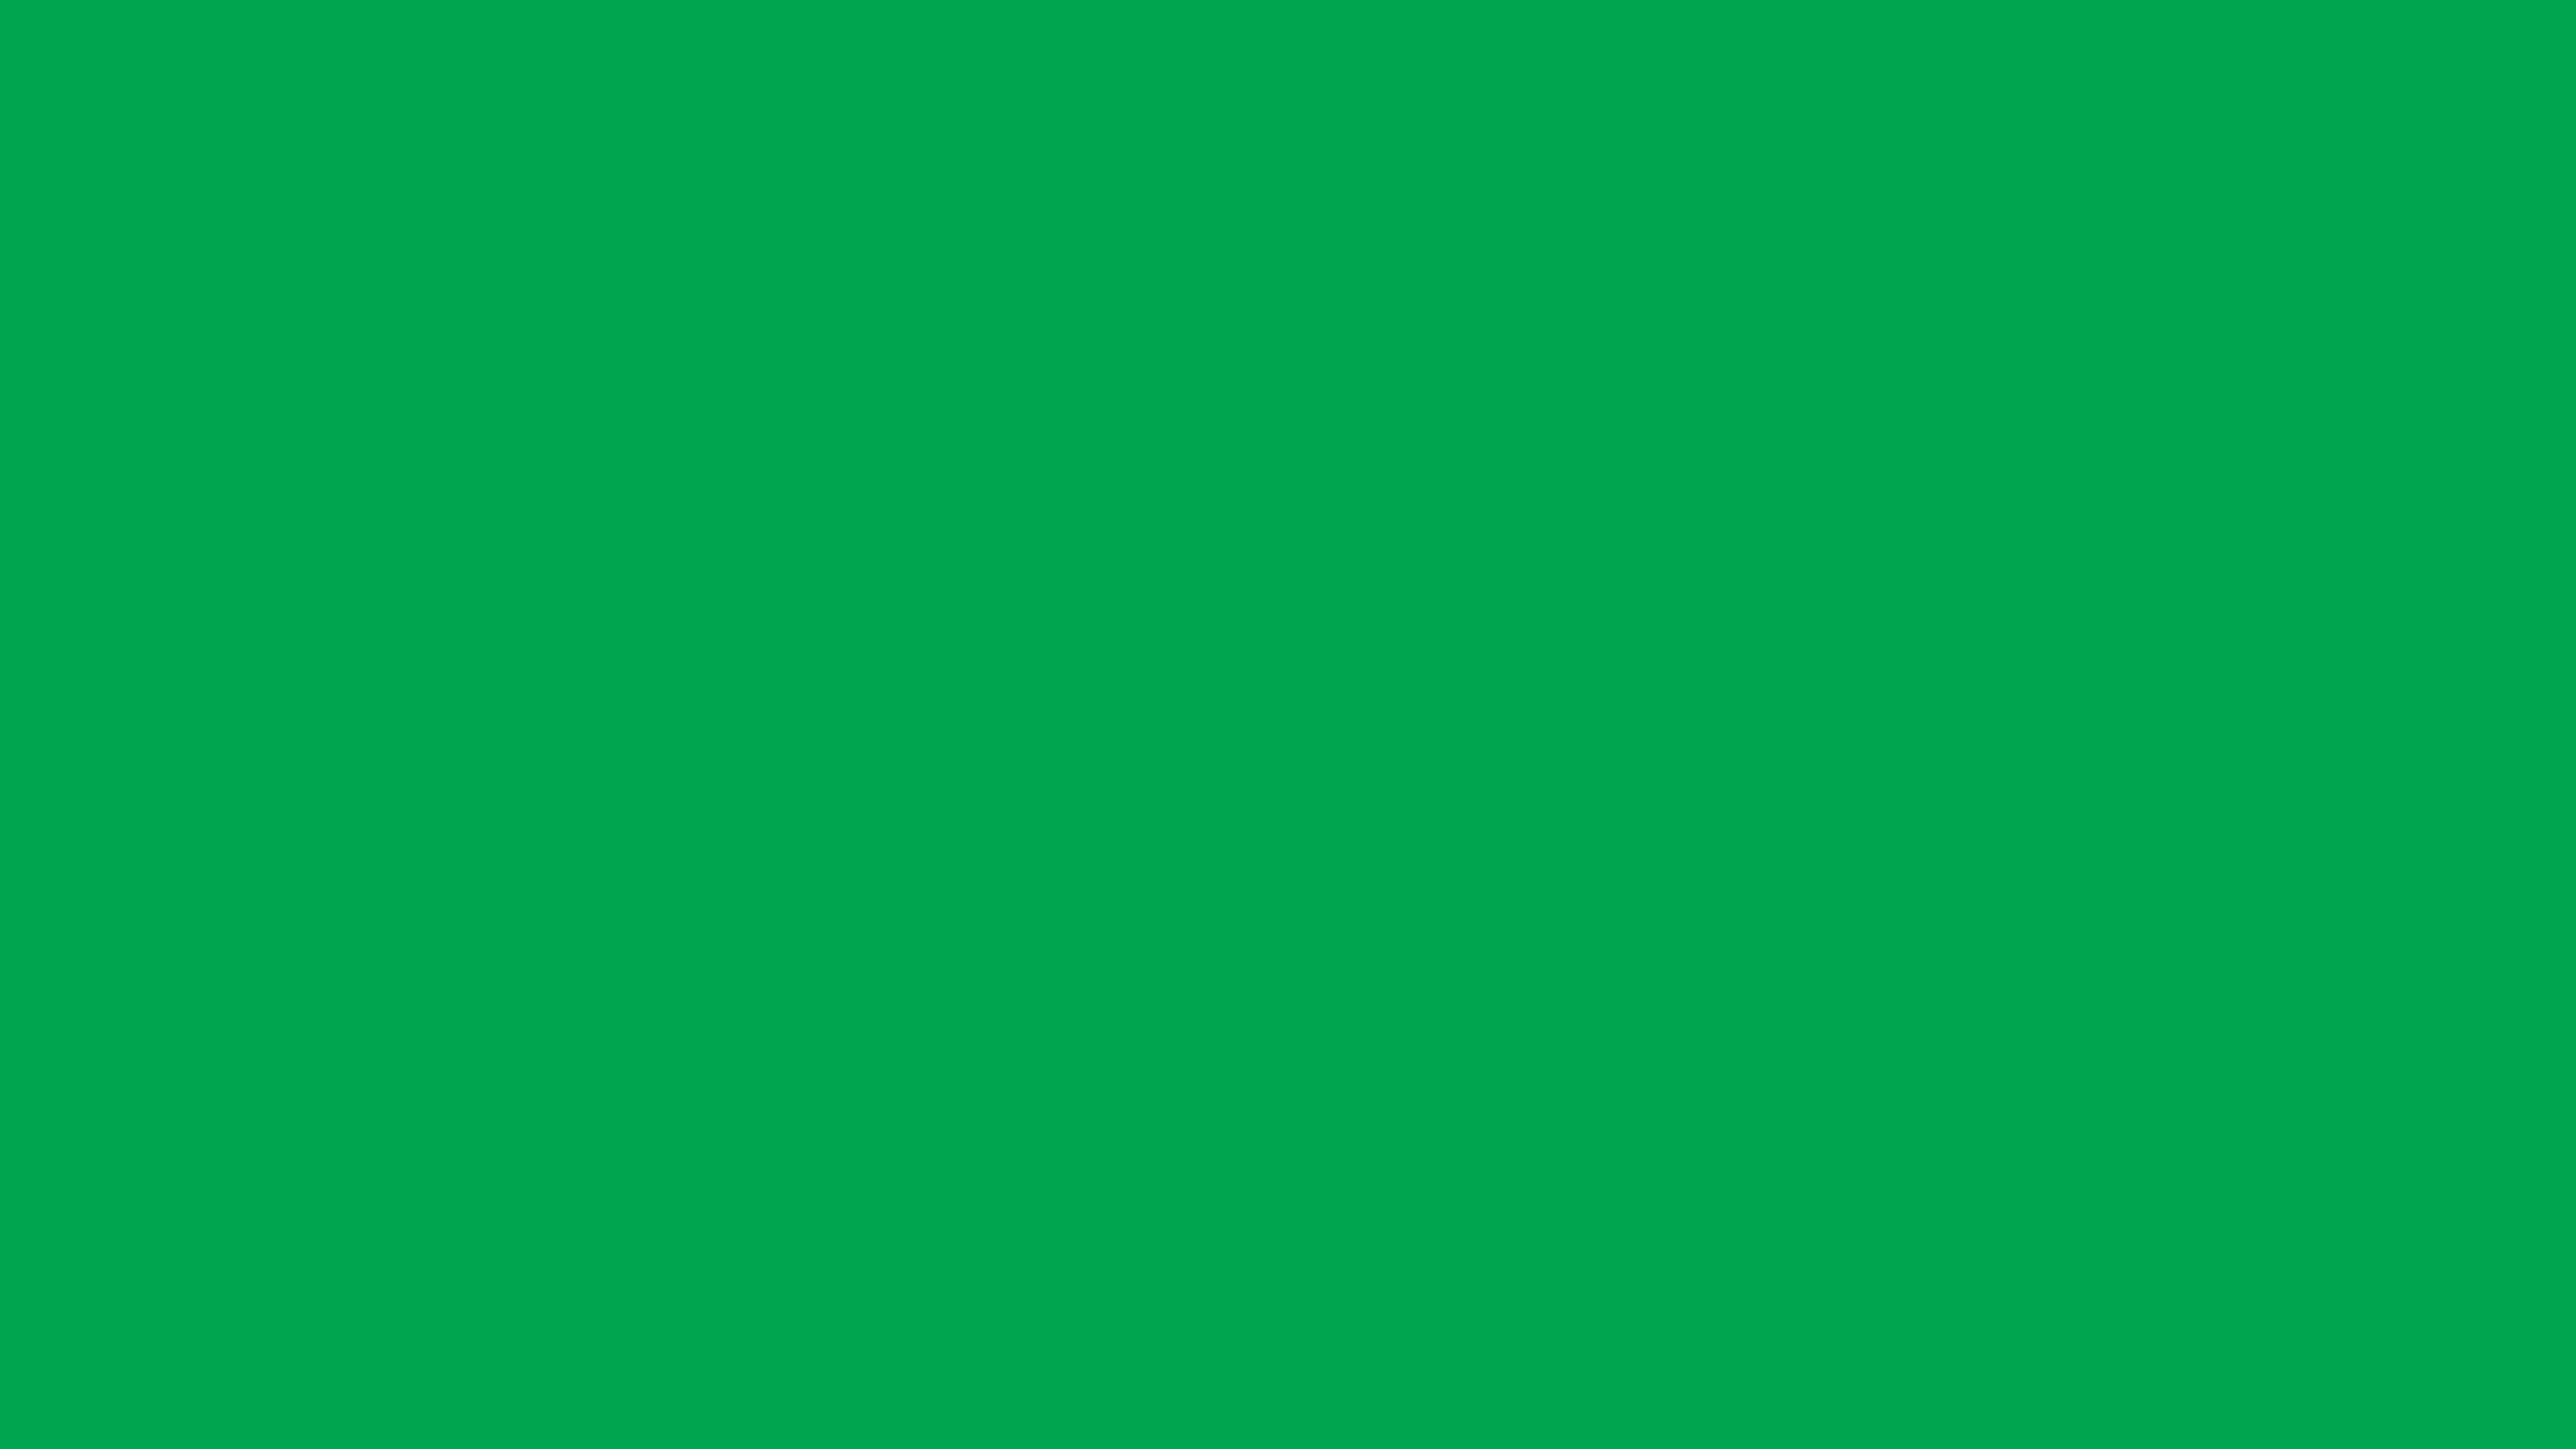 5120x2880 Green Pigment Solid Color Background